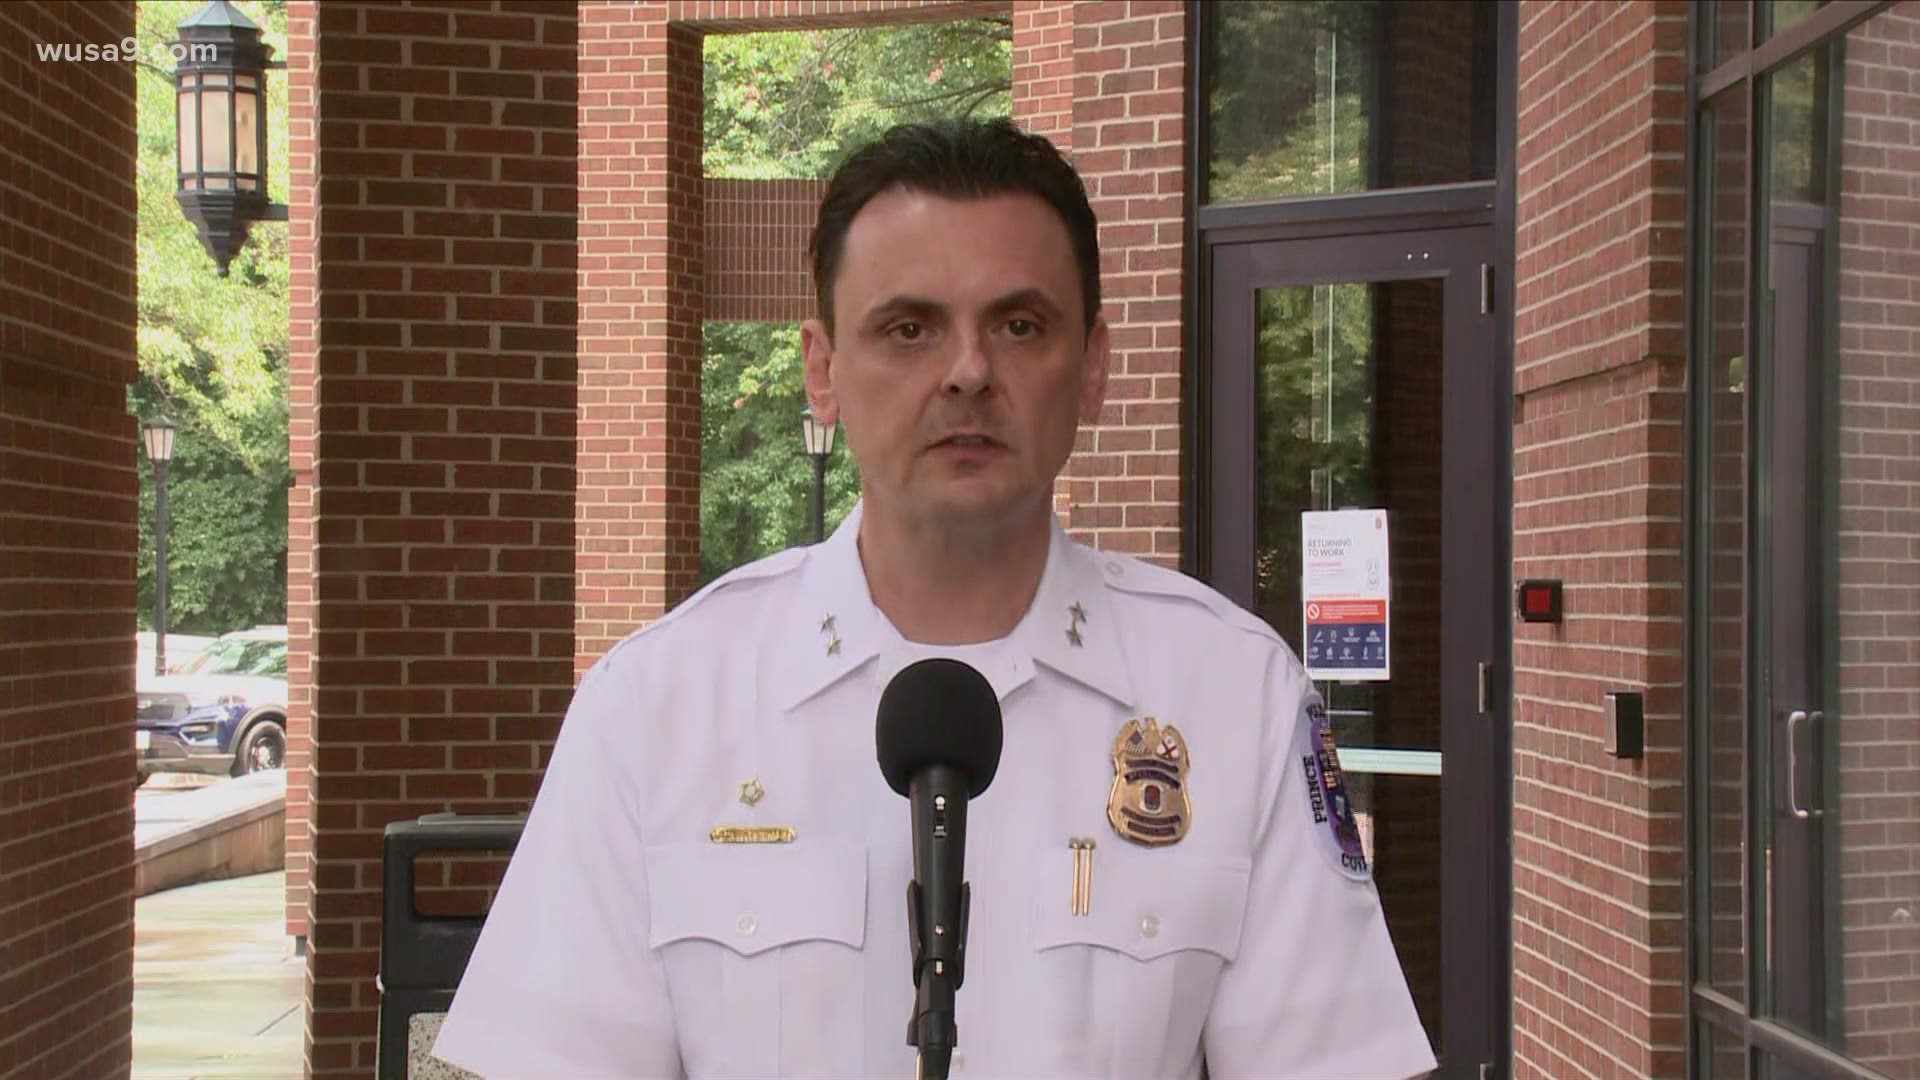 Police say one victim was released from the hospital and the other 3 are expected to survive.